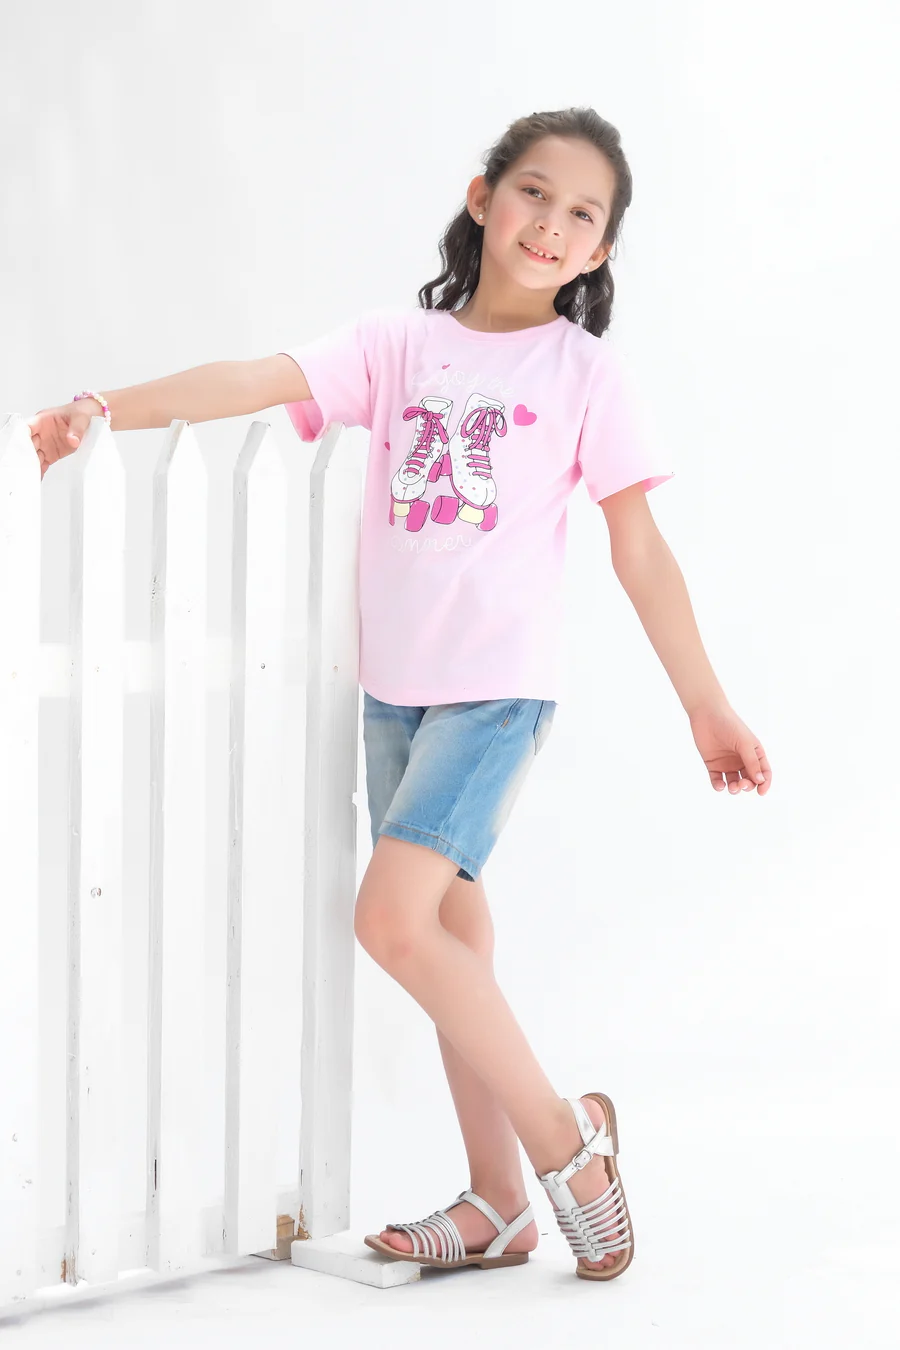 Enjoy The Summer Half Sleeves T-Shirts For Kids - Pink